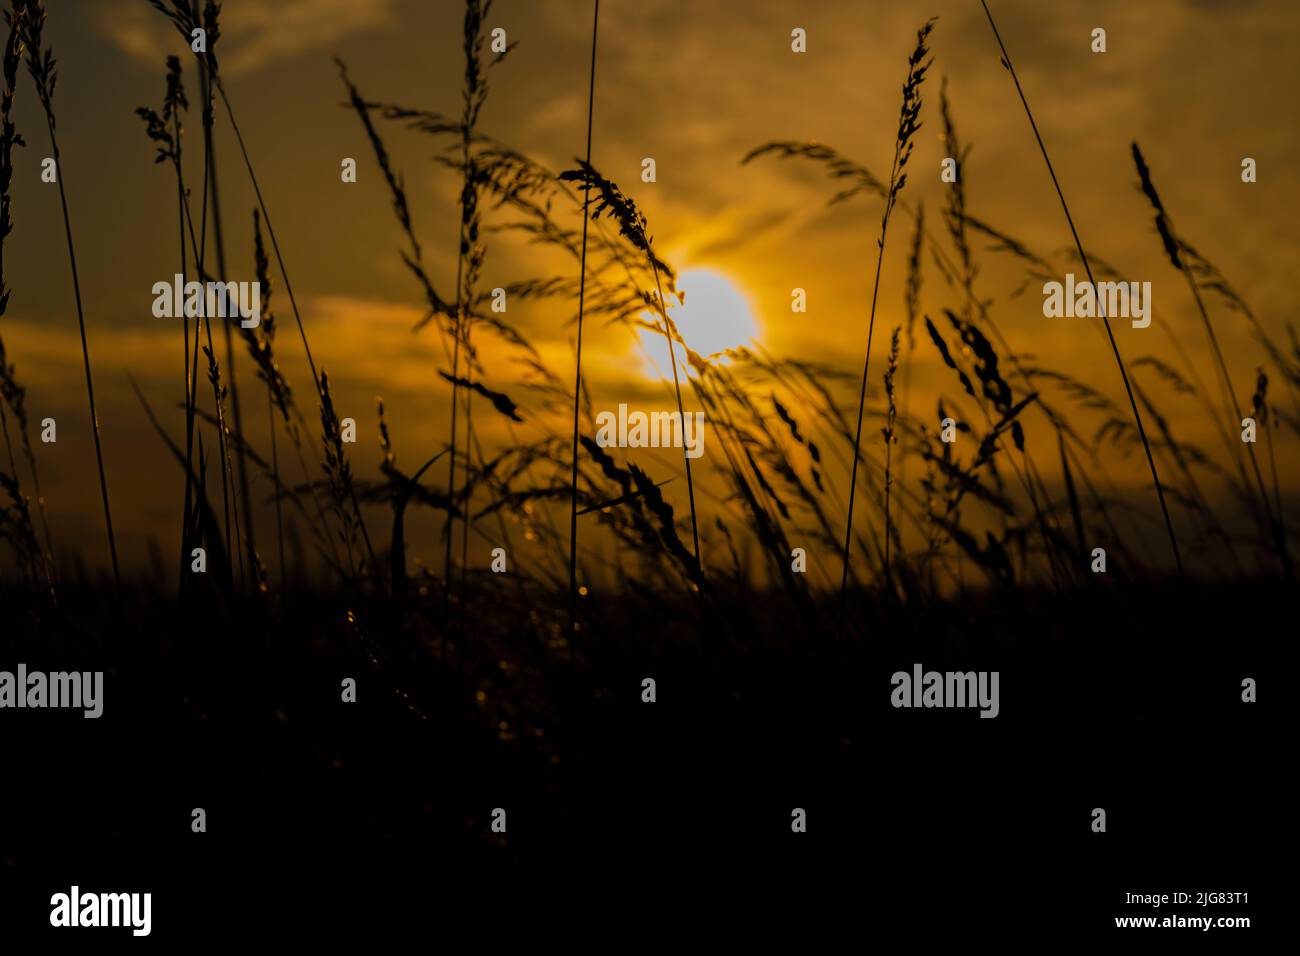 Silhouettes of wildgrass ears shortly after sunrise Stock Photo